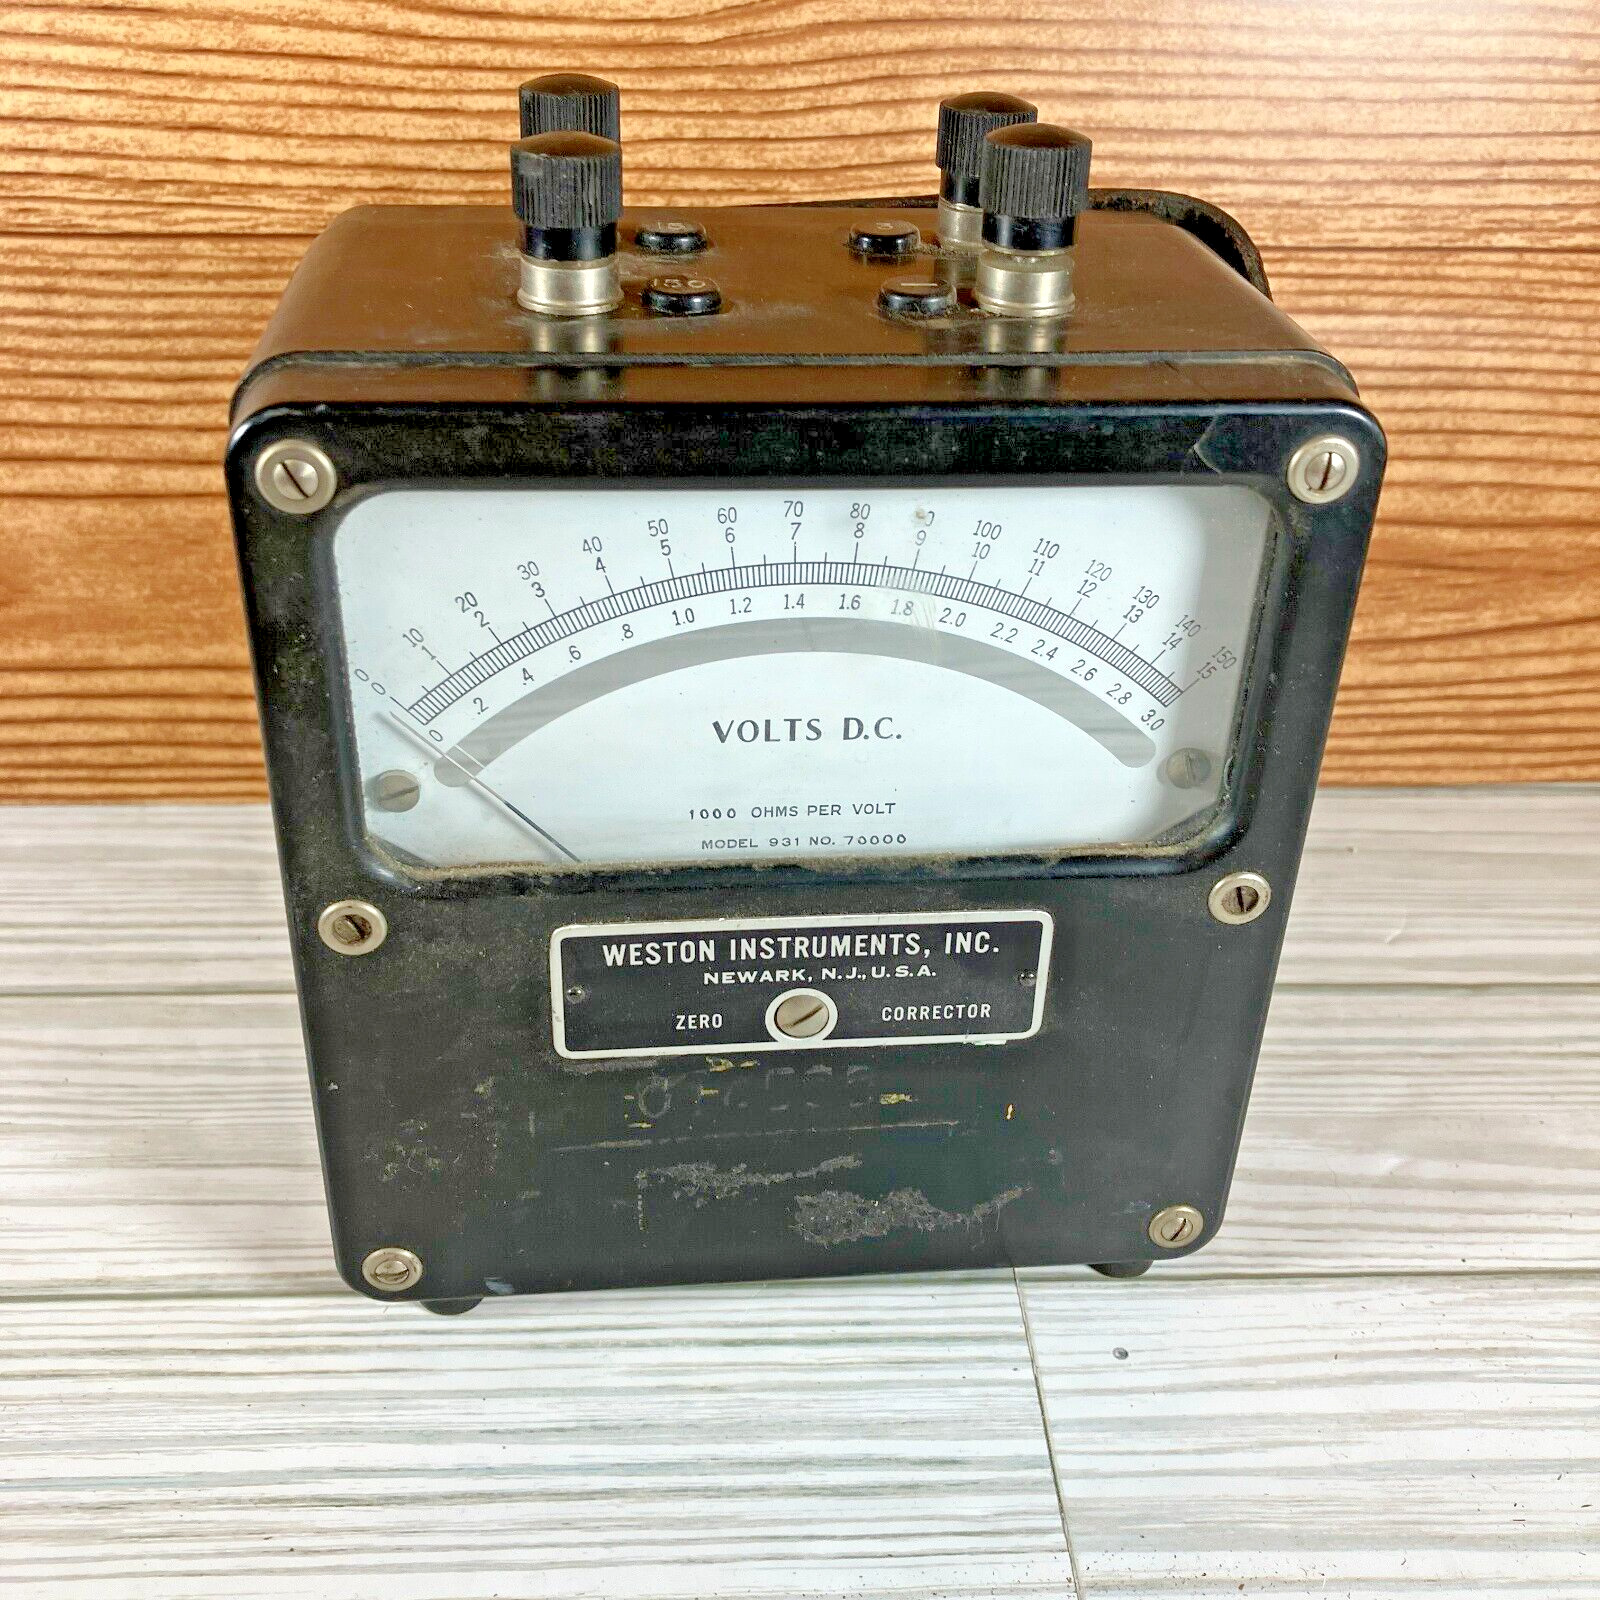 Weston Model 931 No 70000 - OHMS Volts DC BOX METER Early Vintage Untested